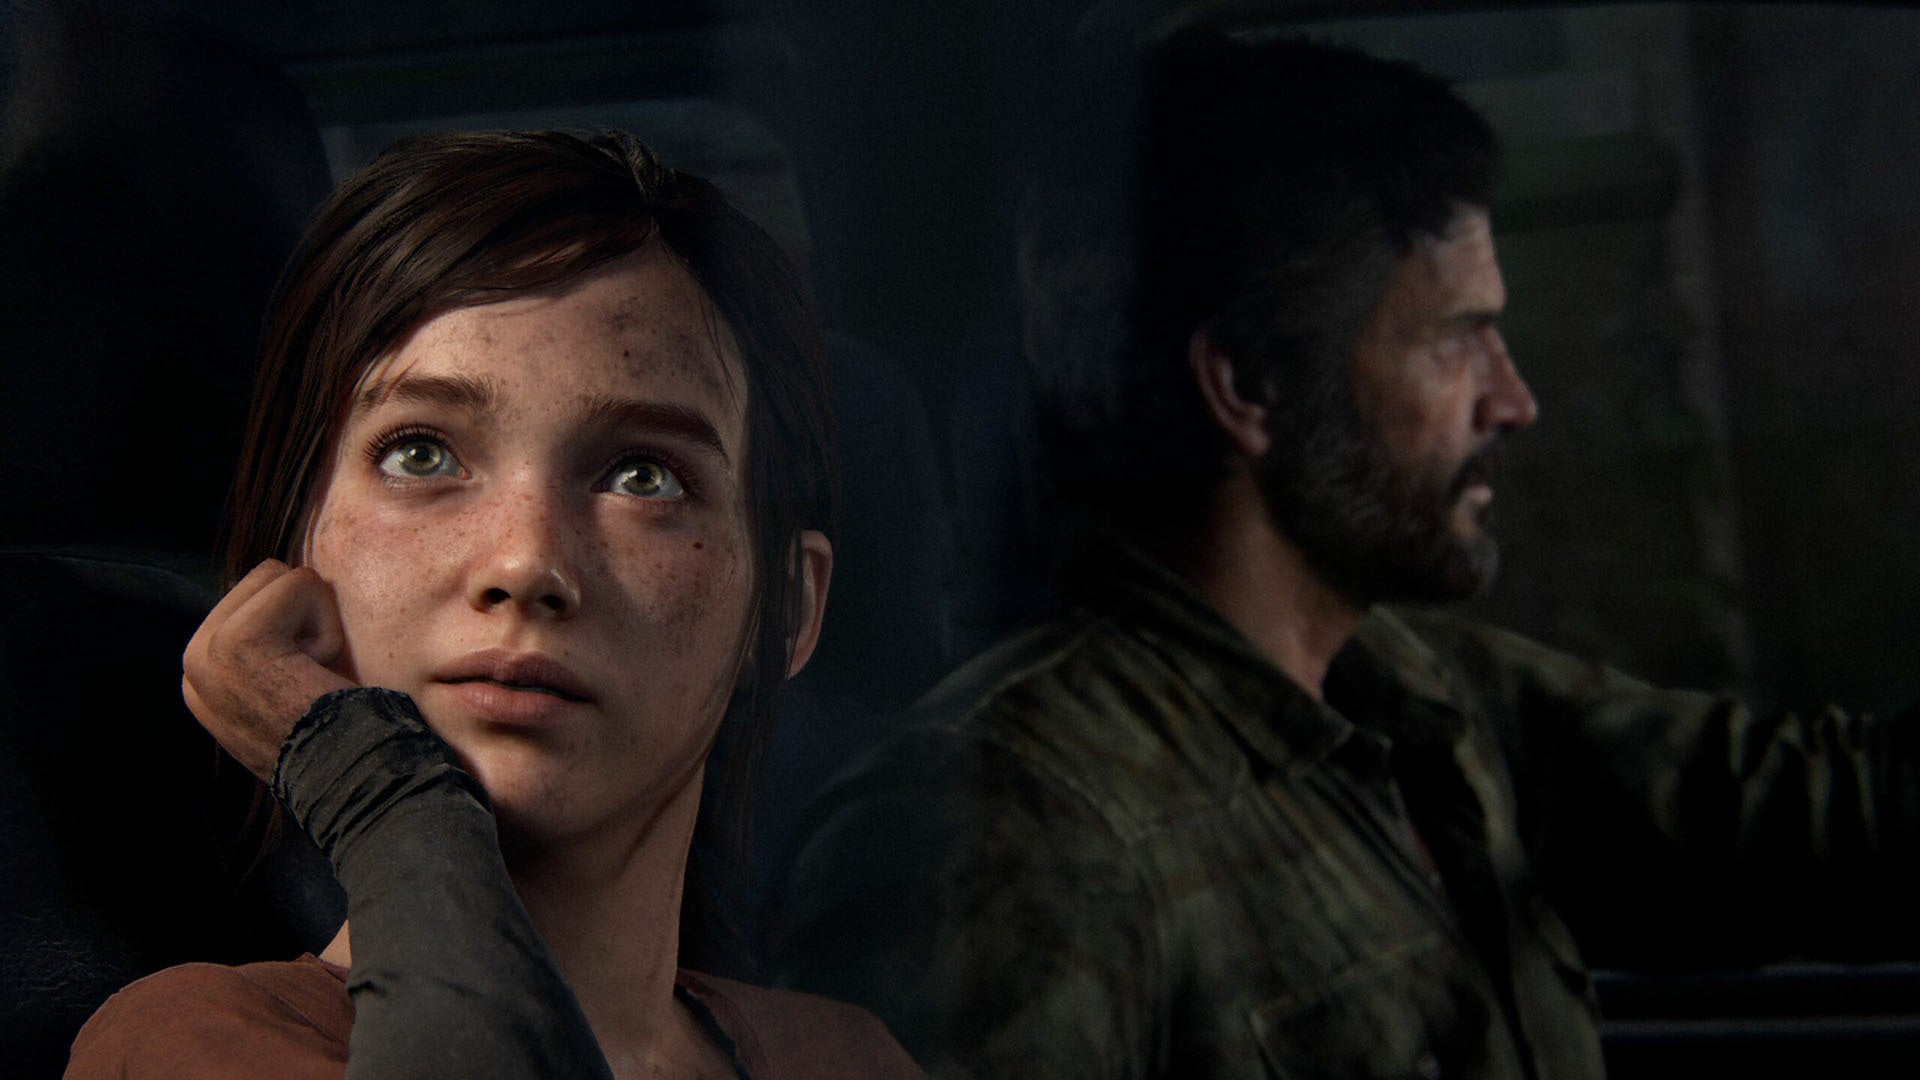 the last of us part 1, showing joel and ellie